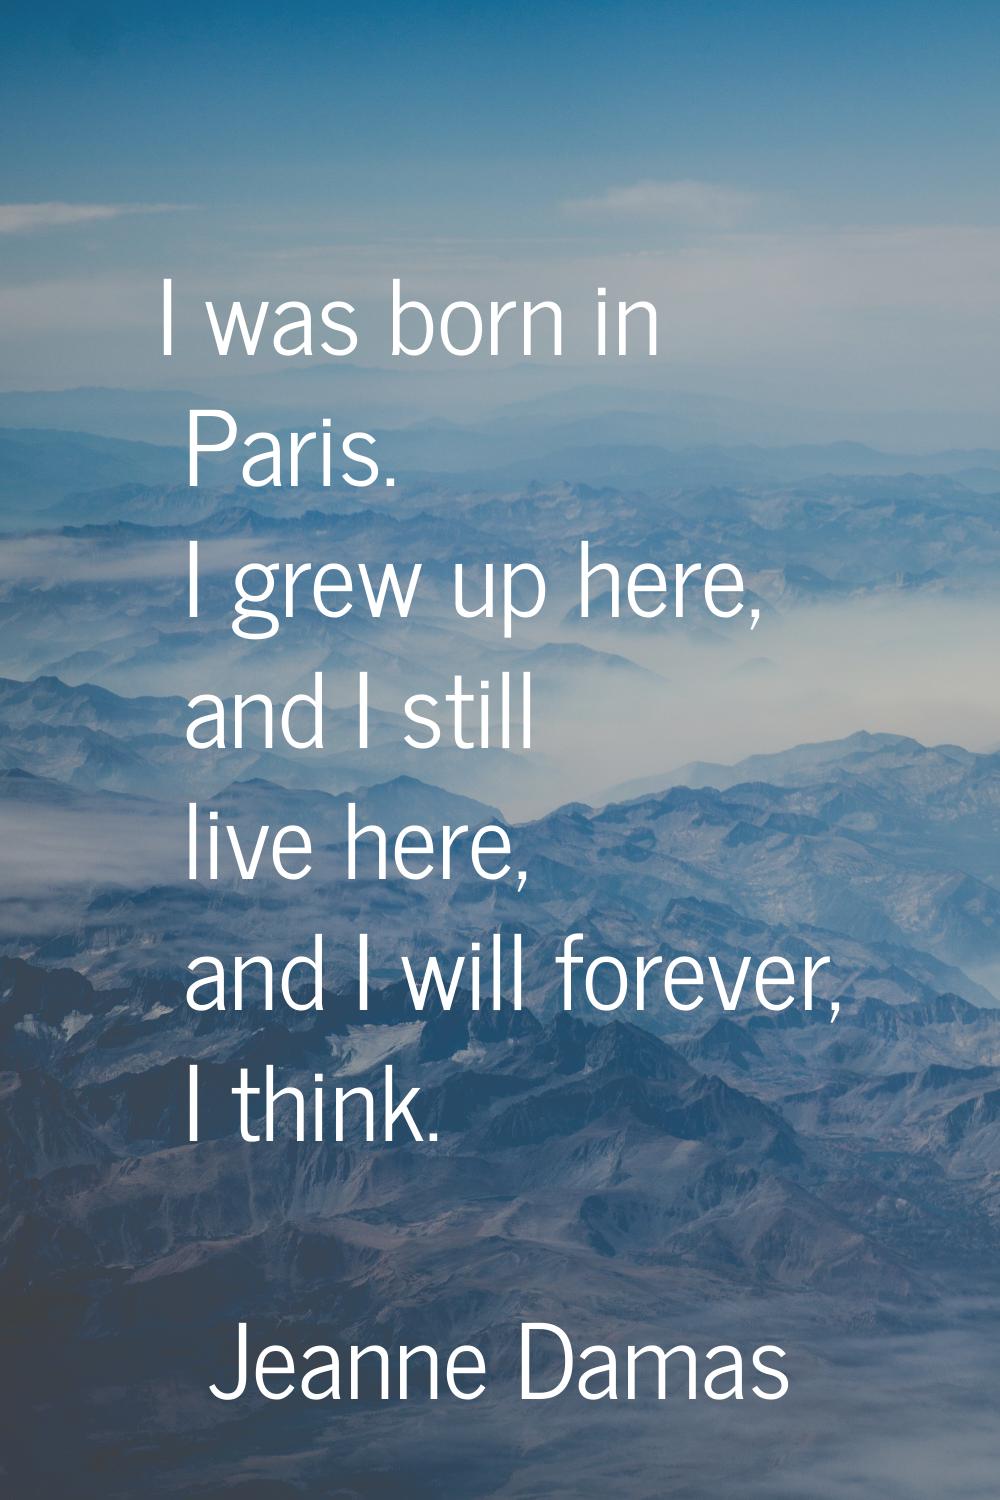 I was born in Paris. I grew up here, and I still live here, and I will forever, I think.